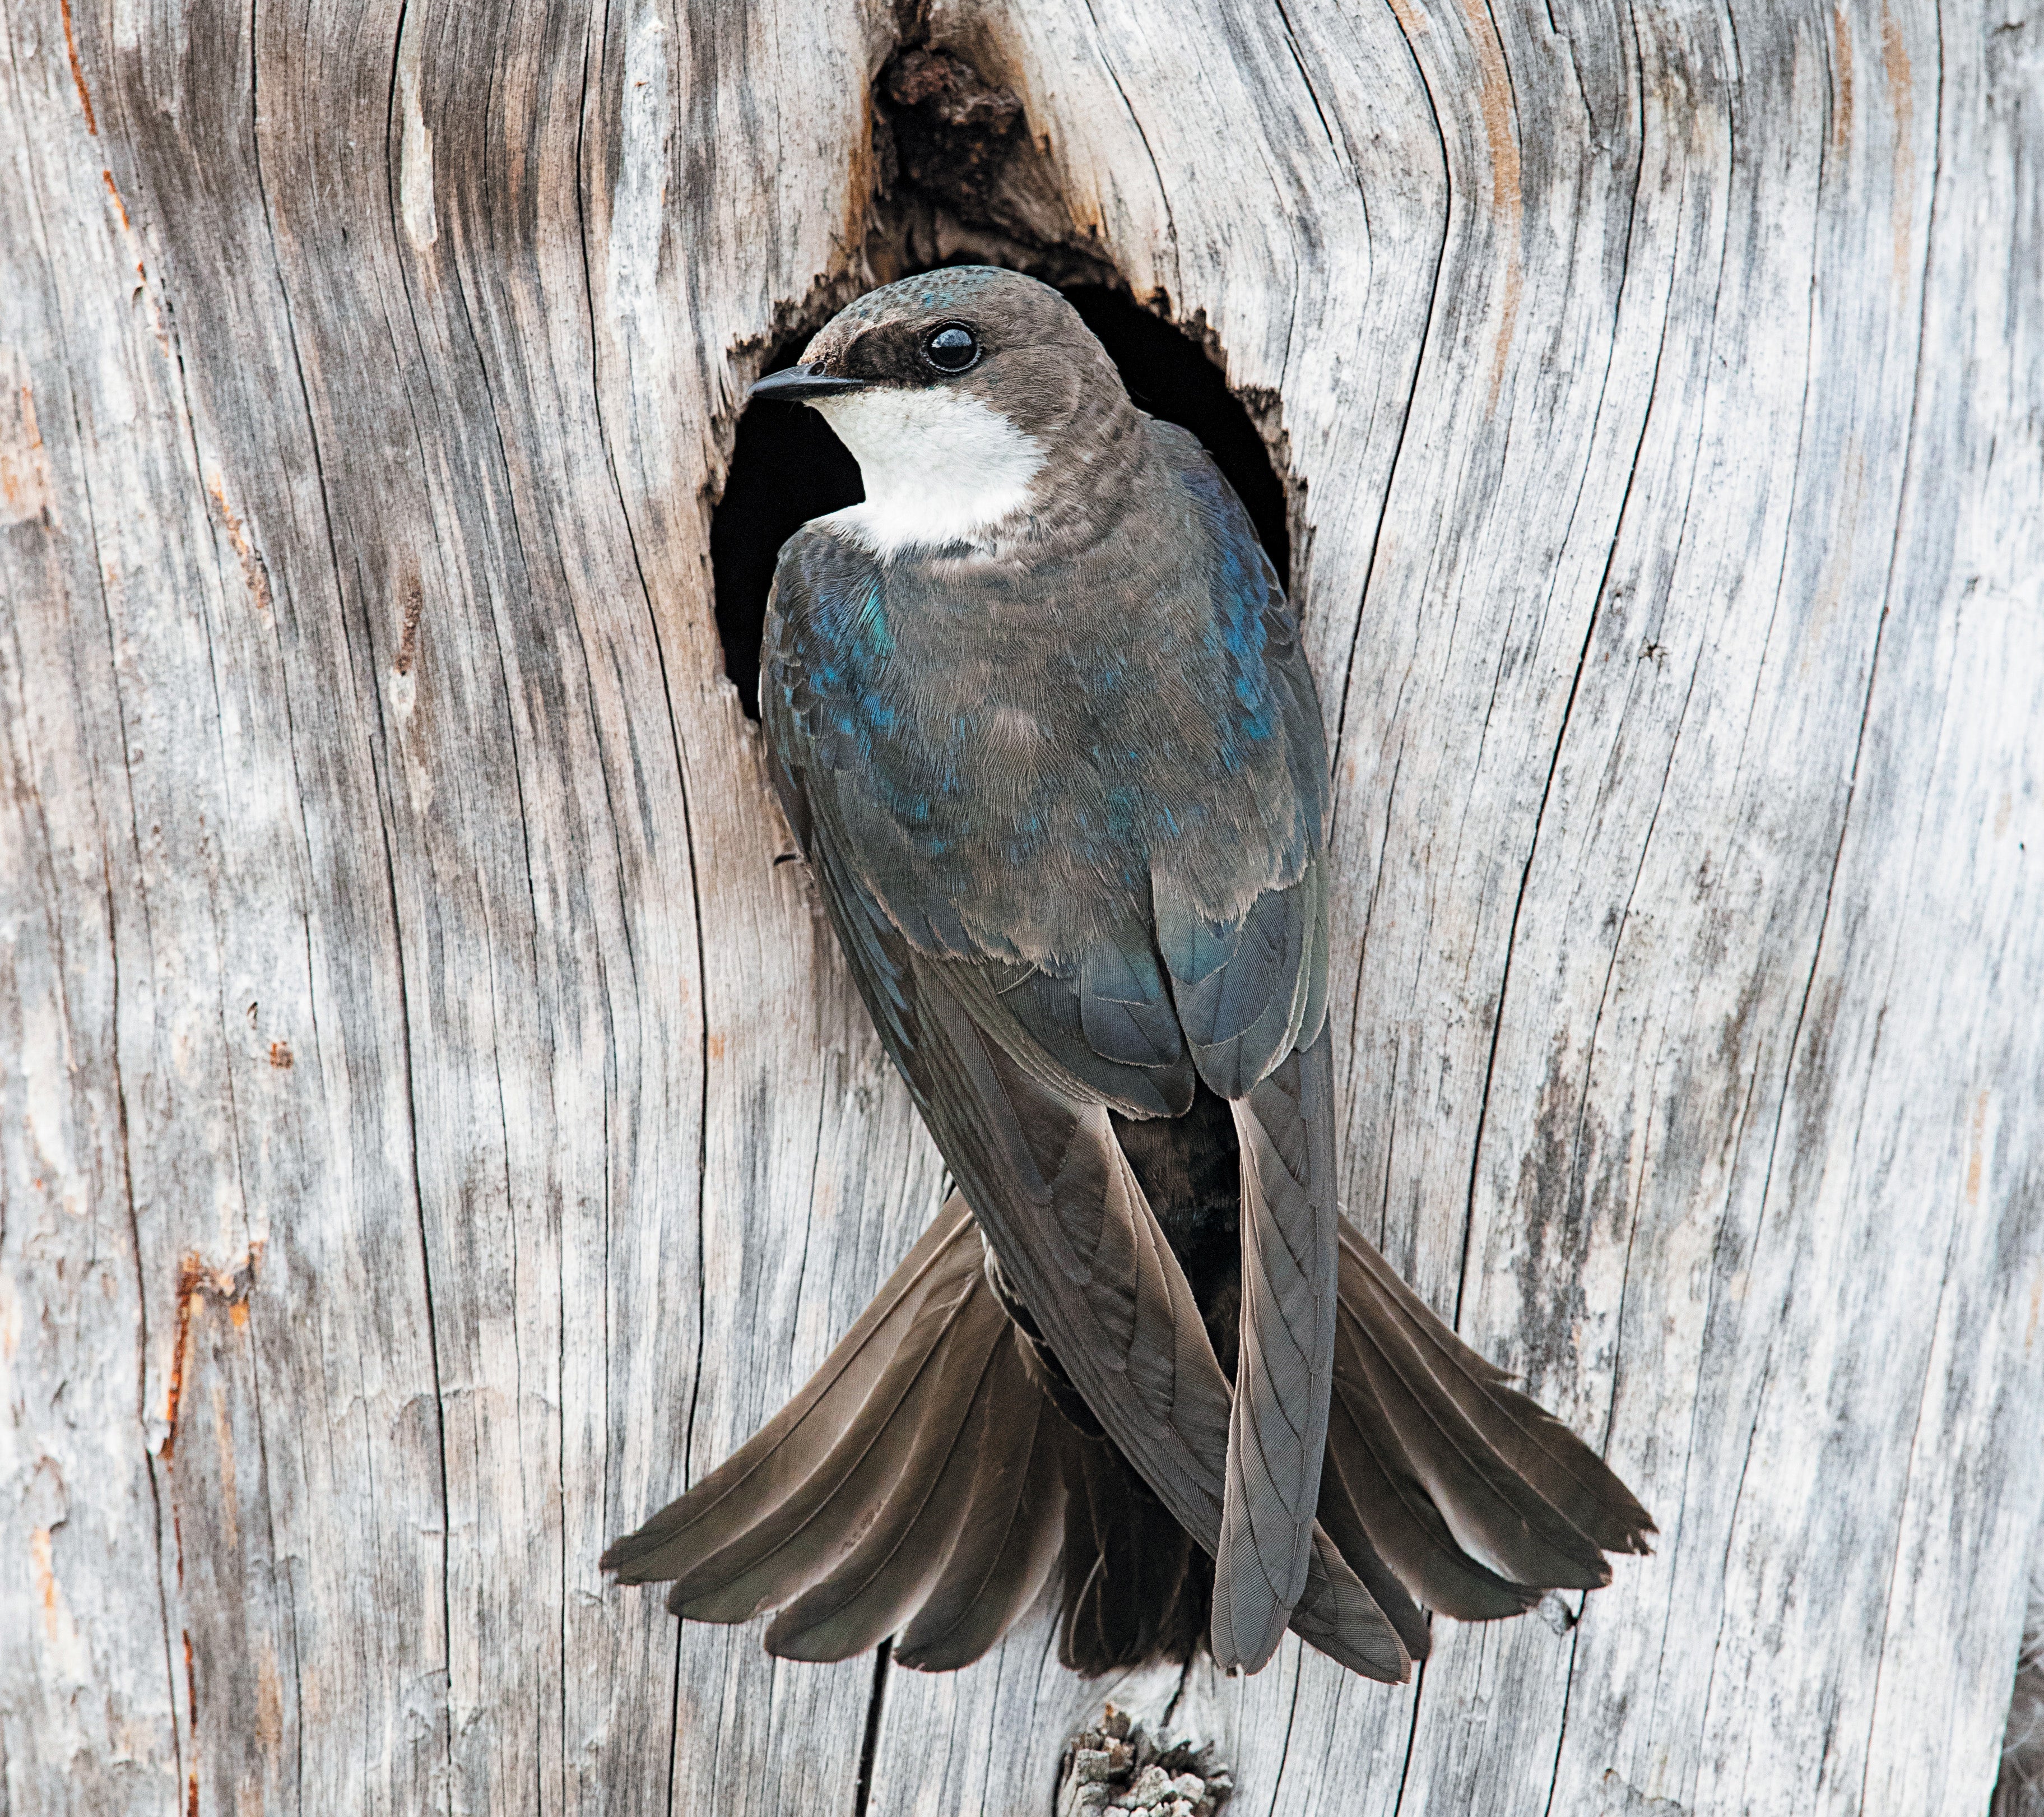 A tree swallow sitting in a hole in a tree